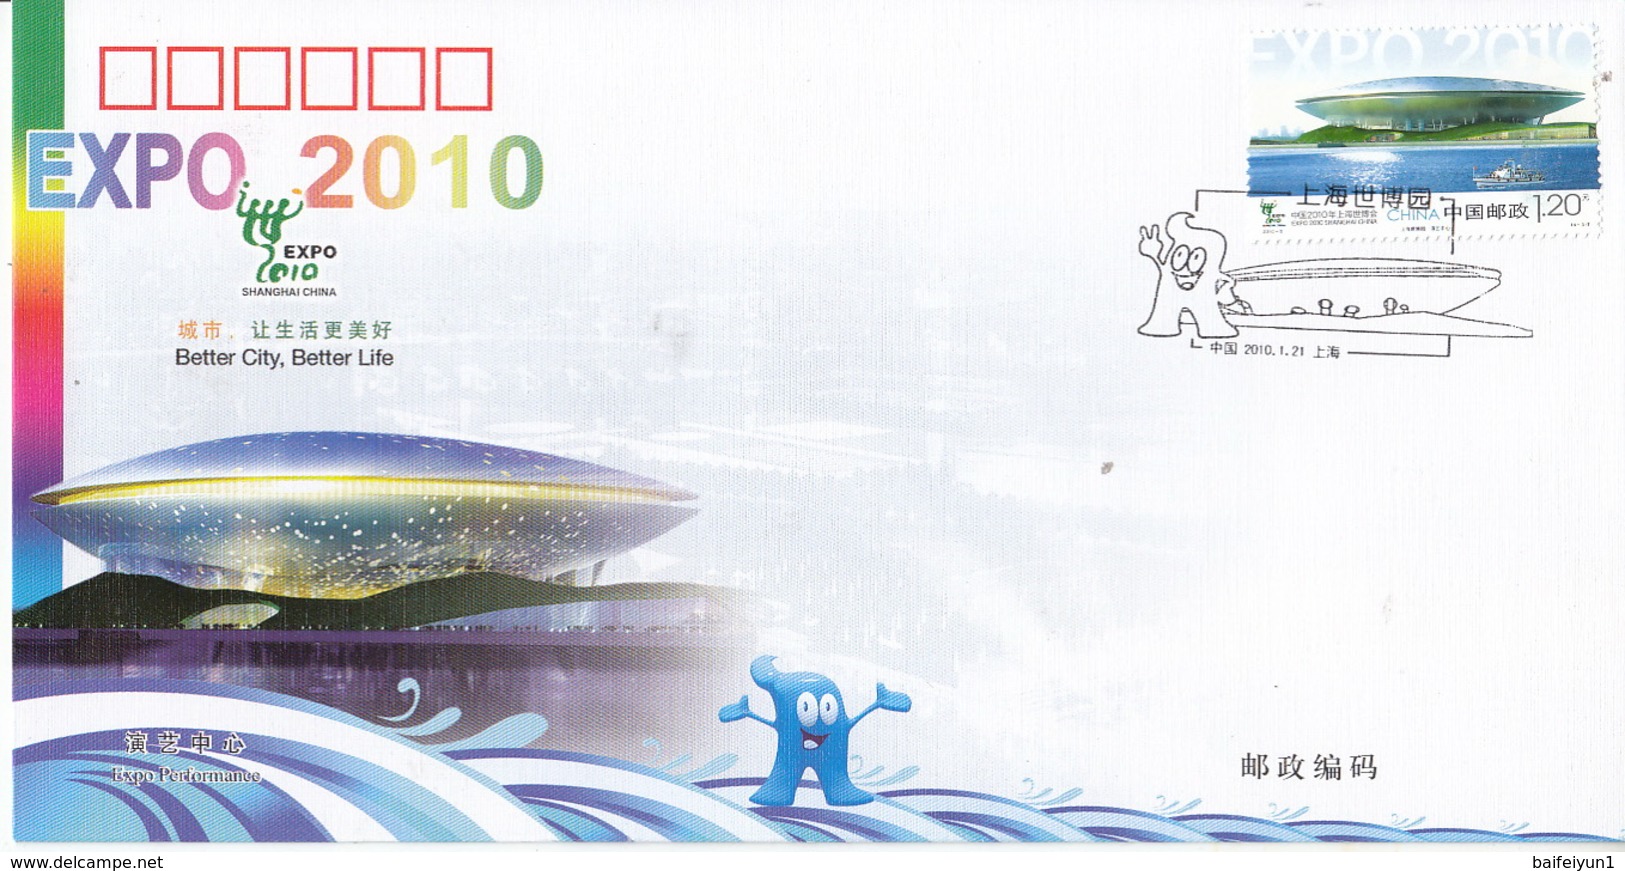 China 2010 Expo 2010 Shanghai stamps FDC and Commemorative covers(15 covers)